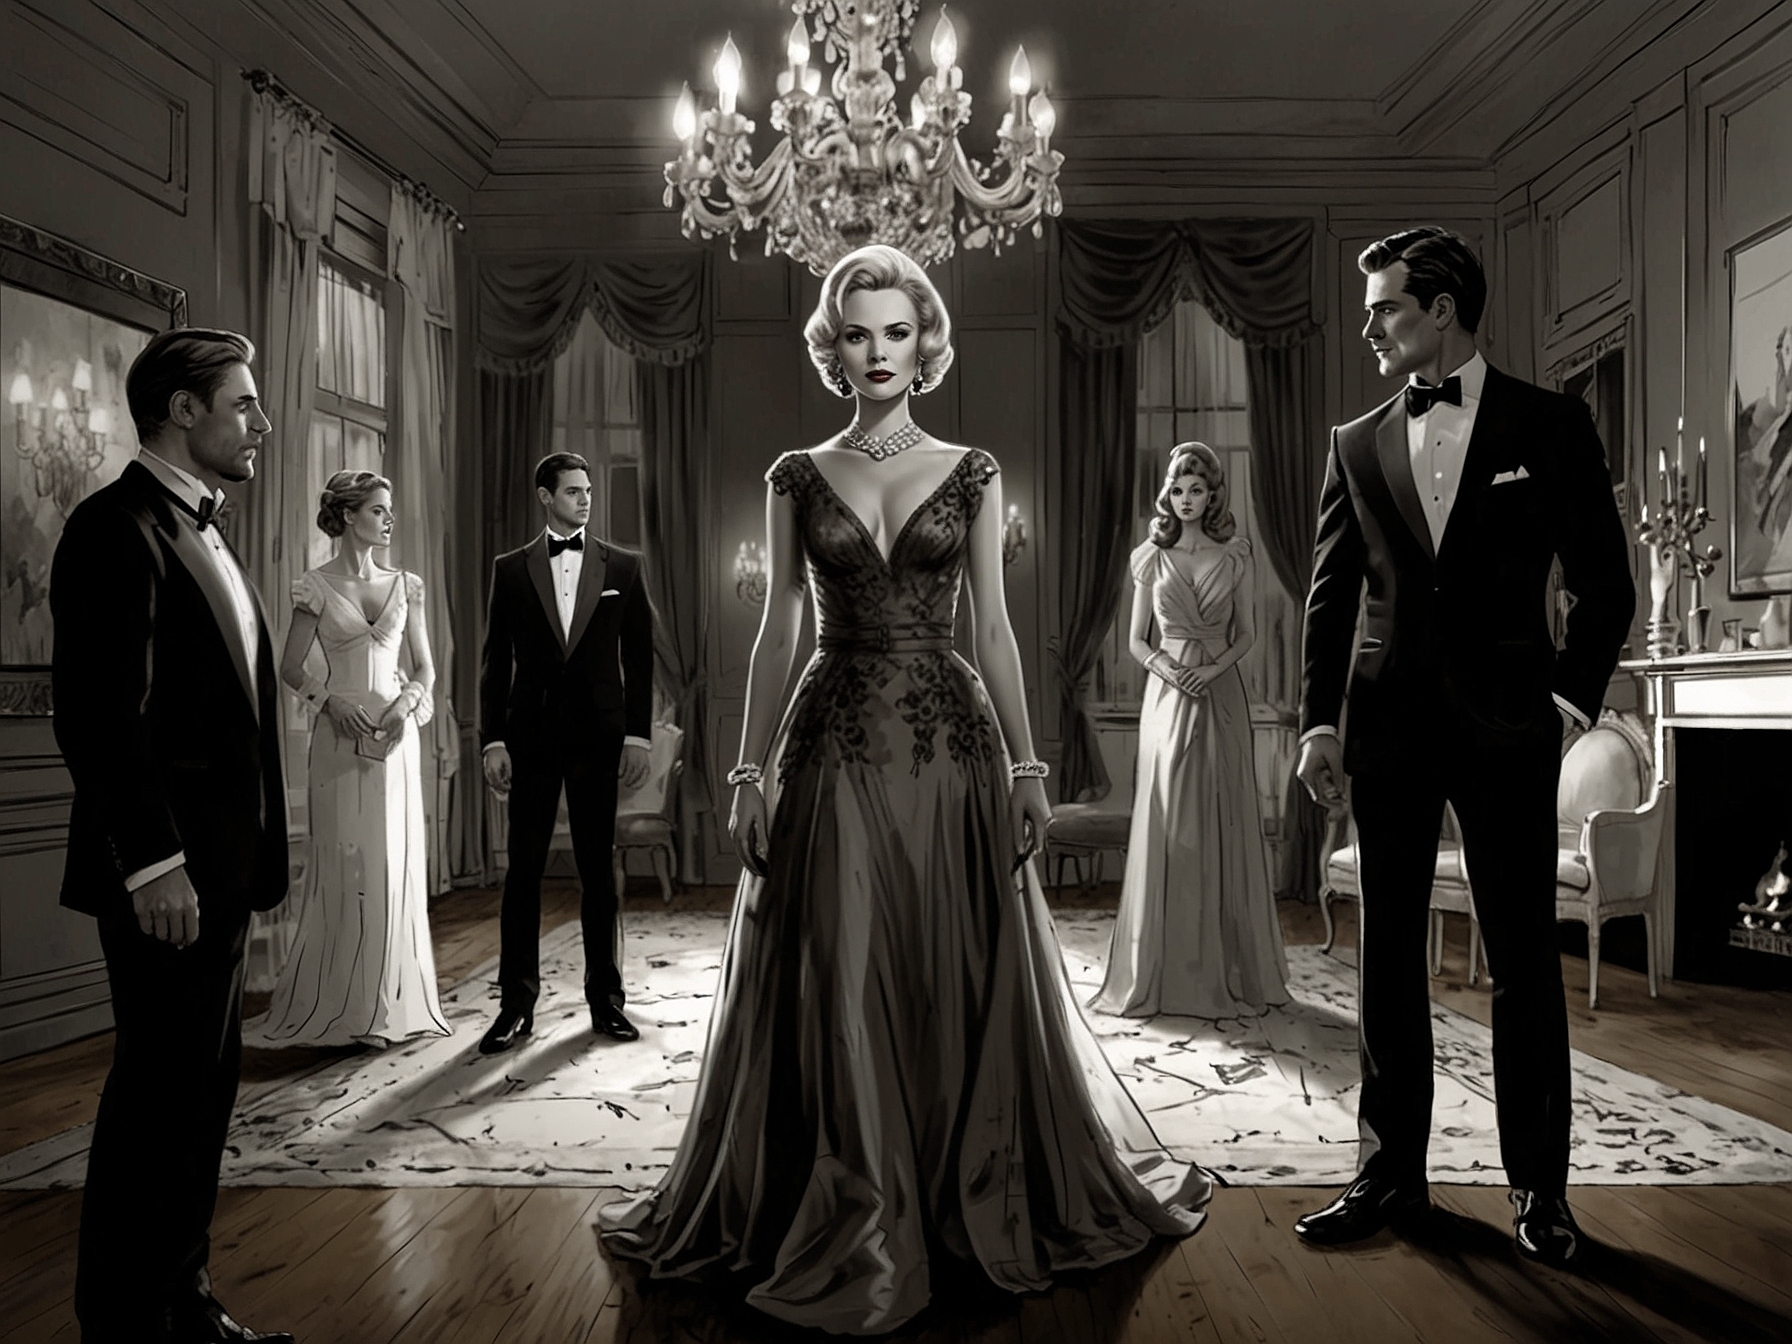 A dramatic scene where the affluent characters, dressed in high fashion, gather with tense expressions, hinting at the underlying secrets and the suspenseful murder mystery in 'The Wives'.